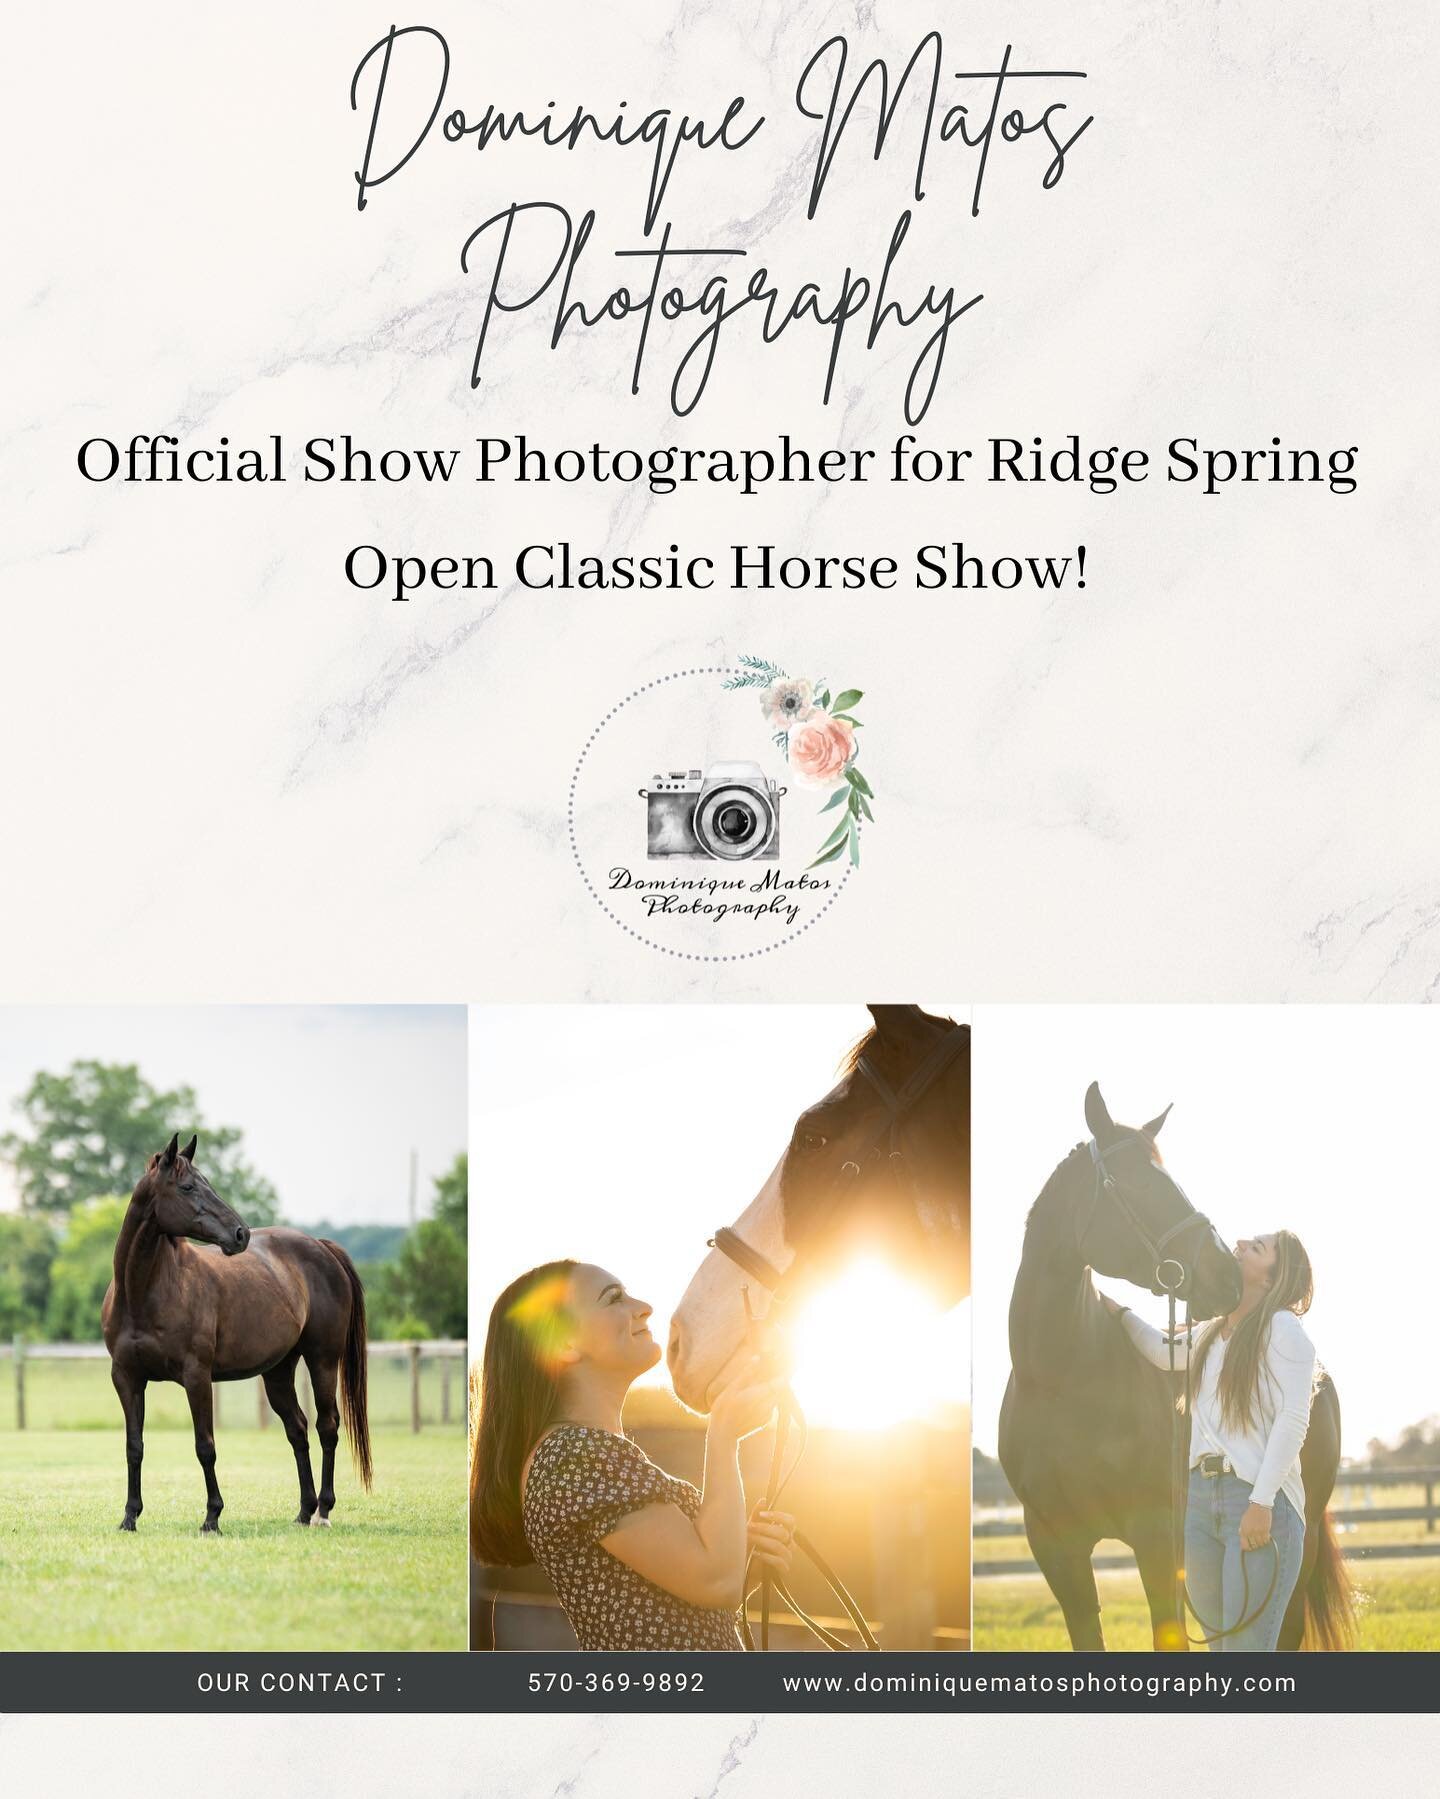 Dominique Matos Photography will be the official photographer for Ridge Spring Open Classic Horse Show this Saturday! If you are going be sure to stop by our booth and say hi!